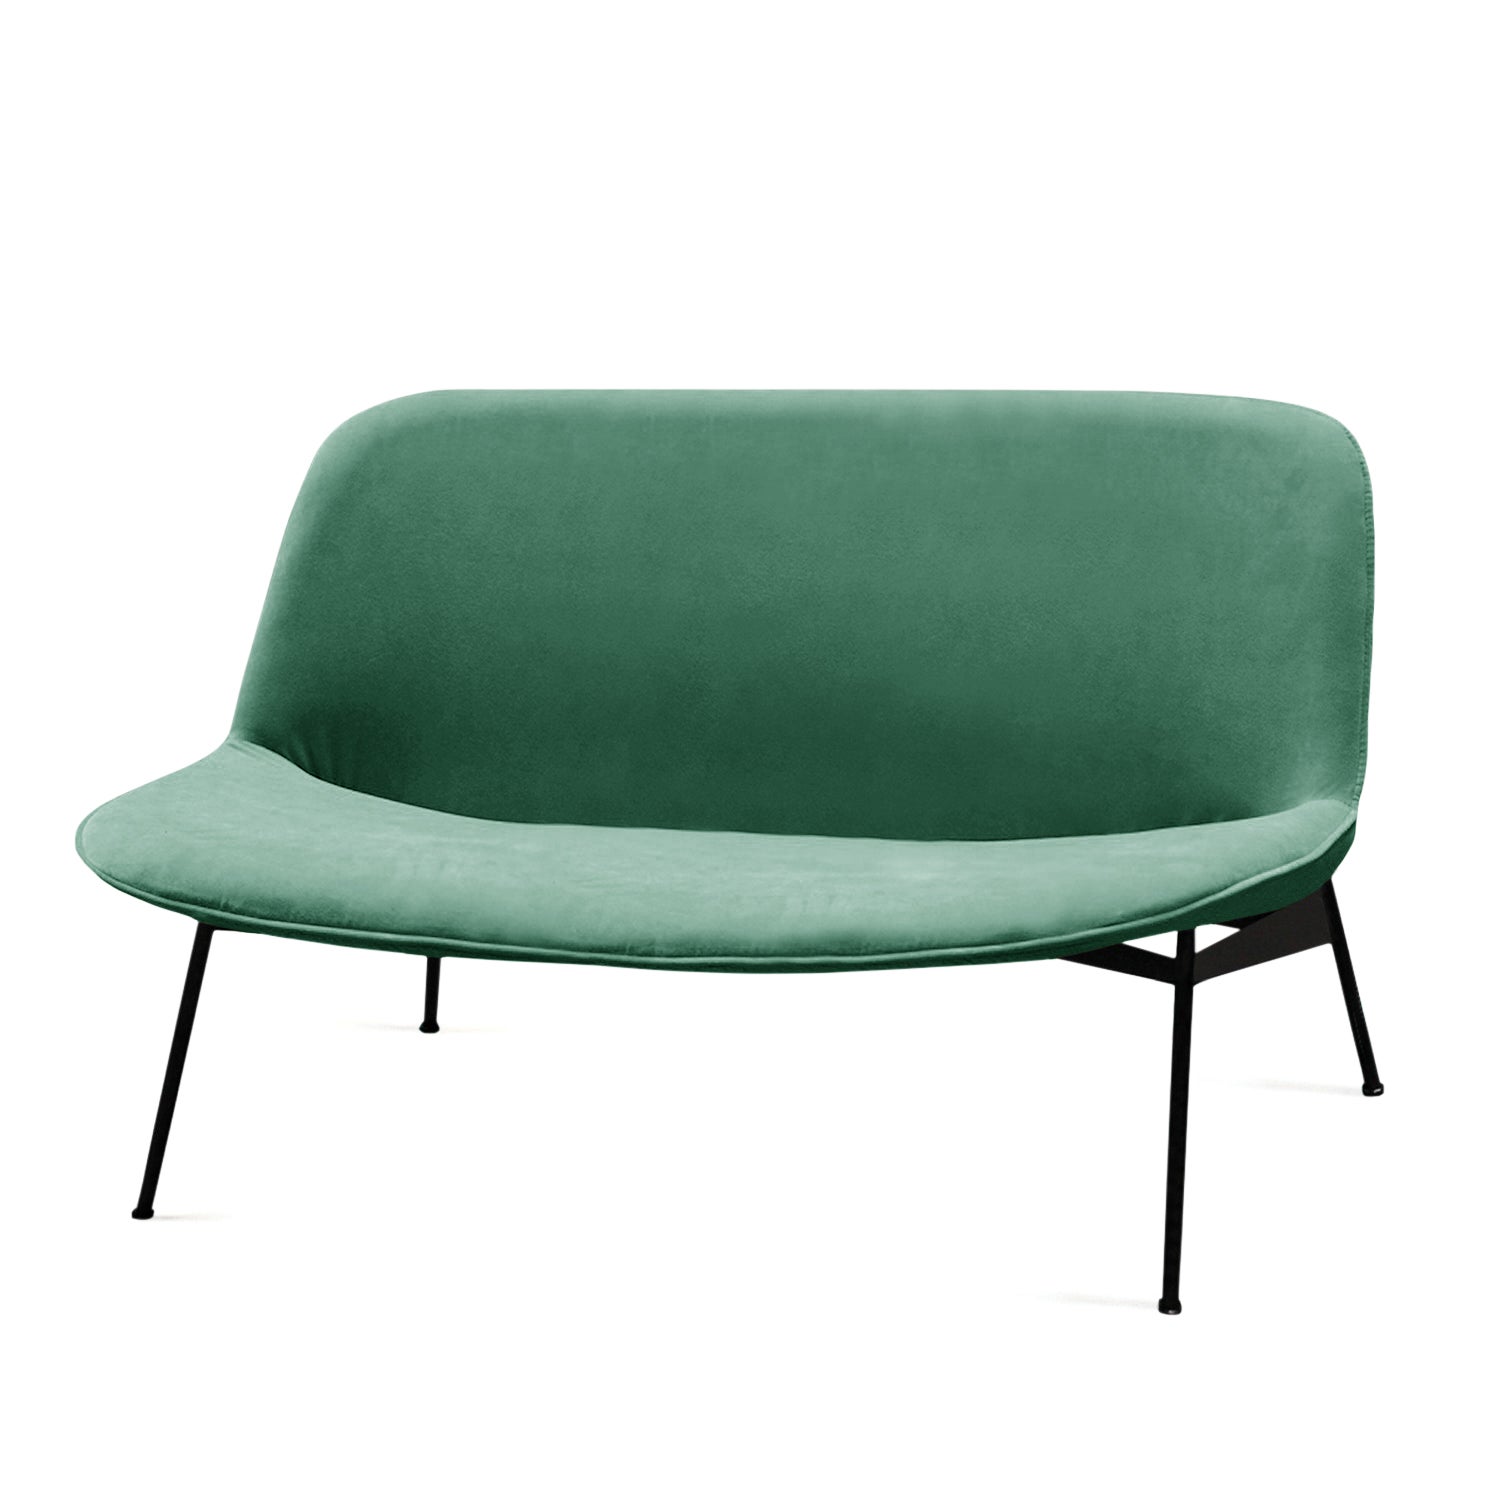 Chiado Sofa, Small with Paris Green and Black For Sale